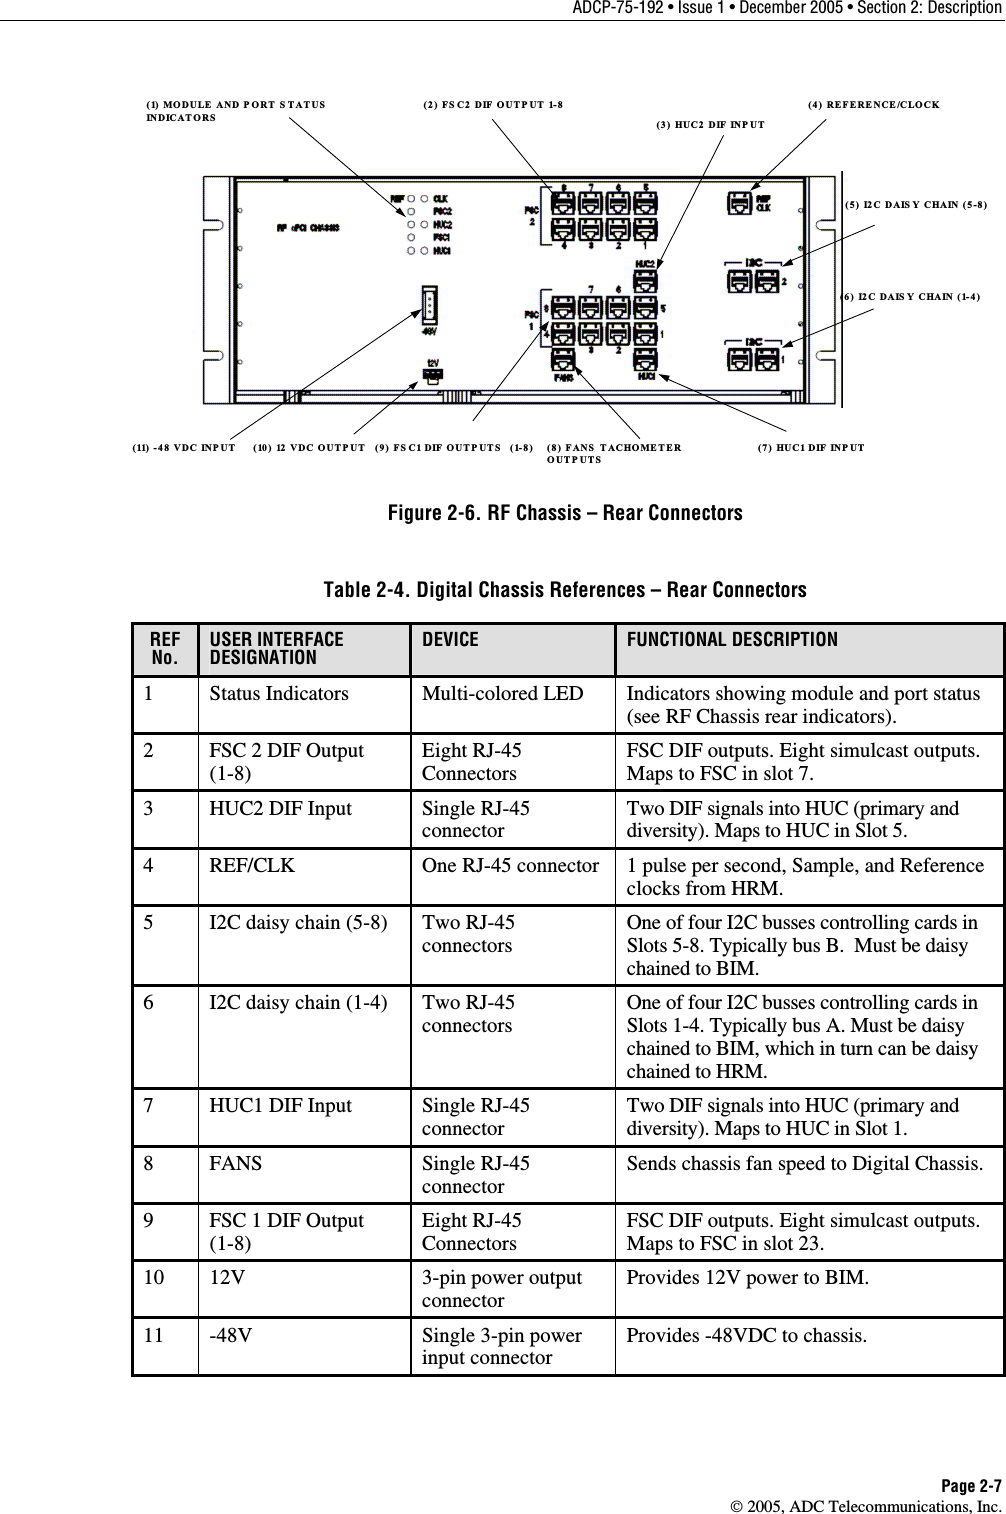 ADCP-75-192 • Issue 1 • December 2005 • Section 2: Description Page 2-7  2005, ADC Telecommunications, Inc. (1) MODULE AND PORT S TATUS  INDICATORS(10) 12 VDC OUTPUT(11) -48 VDC INPUT(2) FS C2 DIF OUTP UT 1-8(3) HUC2 DIF INP UT(4) REFERENCE/CLOCK(6) I2C DAIS Y CHAIN (1-4)(8) FANS  TACHOMETER OUTPUTS(5) I2C DAIS Y CHAIN (5-8)(7) HUC1 DIF INP UT(9) FSC1 DIF OUTP UTS   (1-8) Figure 2-6. RF Chassis – Rear Connectors Table 2-4. Digital Chassis References – Rear Connectors REF No. USER INTERFACE DESIGNATION DEVICE  FUNCTIONAL DESCRIPTION 1  Status Indicators  Multi-colored LED  Indicators showing module and port status (see RF Chassis rear indicators).  2  FSC 2 DIF Output (1-8) Eight RJ-45 Connectors FSC DIF outputs. Eight simulcast outputs. Maps to FSC in slot 7.  3  HUC2 DIF Input  Single RJ-45 connector Two DIF signals into HUC (primary and diversity). Maps to HUC in Slot 5.  4  REF/CLK  One RJ-45 connector  1 pulse per second, Sample, and Reference clocks from HRM.  5  I2C daisy chain (5-8)  Two RJ-45 connectors One of four I2C busses controlling cards in Slots 5-8. Typically bus B.  Must be daisy chained to BIM.  6  I2C daisy chain (1-4)  Two RJ-45 connectors One of four I2C busses controlling cards in Slots 1-4. Typically bus A. Must be daisy chained to BIM, which in turn can be daisy chained to HRM.  7  HUC1 DIF Input  Single RJ-45 connector Two DIF signals into HUC (primary and diversity). Maps to HUC in Slot 1.  8 FANS  Single RJ-45 connector Sends chassis fan speed to Digital Chassis.  9  FSC 1 DIF Output (1-8) Eight RJ-45 Connectors FSC DIF outputs. Eight simulcast outputs. Maps to FSC in slot 23.  10 12V  3-pin power output connector Provides 12V power to BIM.  11 -48V  Single 3-pin power input connector Provides -48VDC to chassis.   